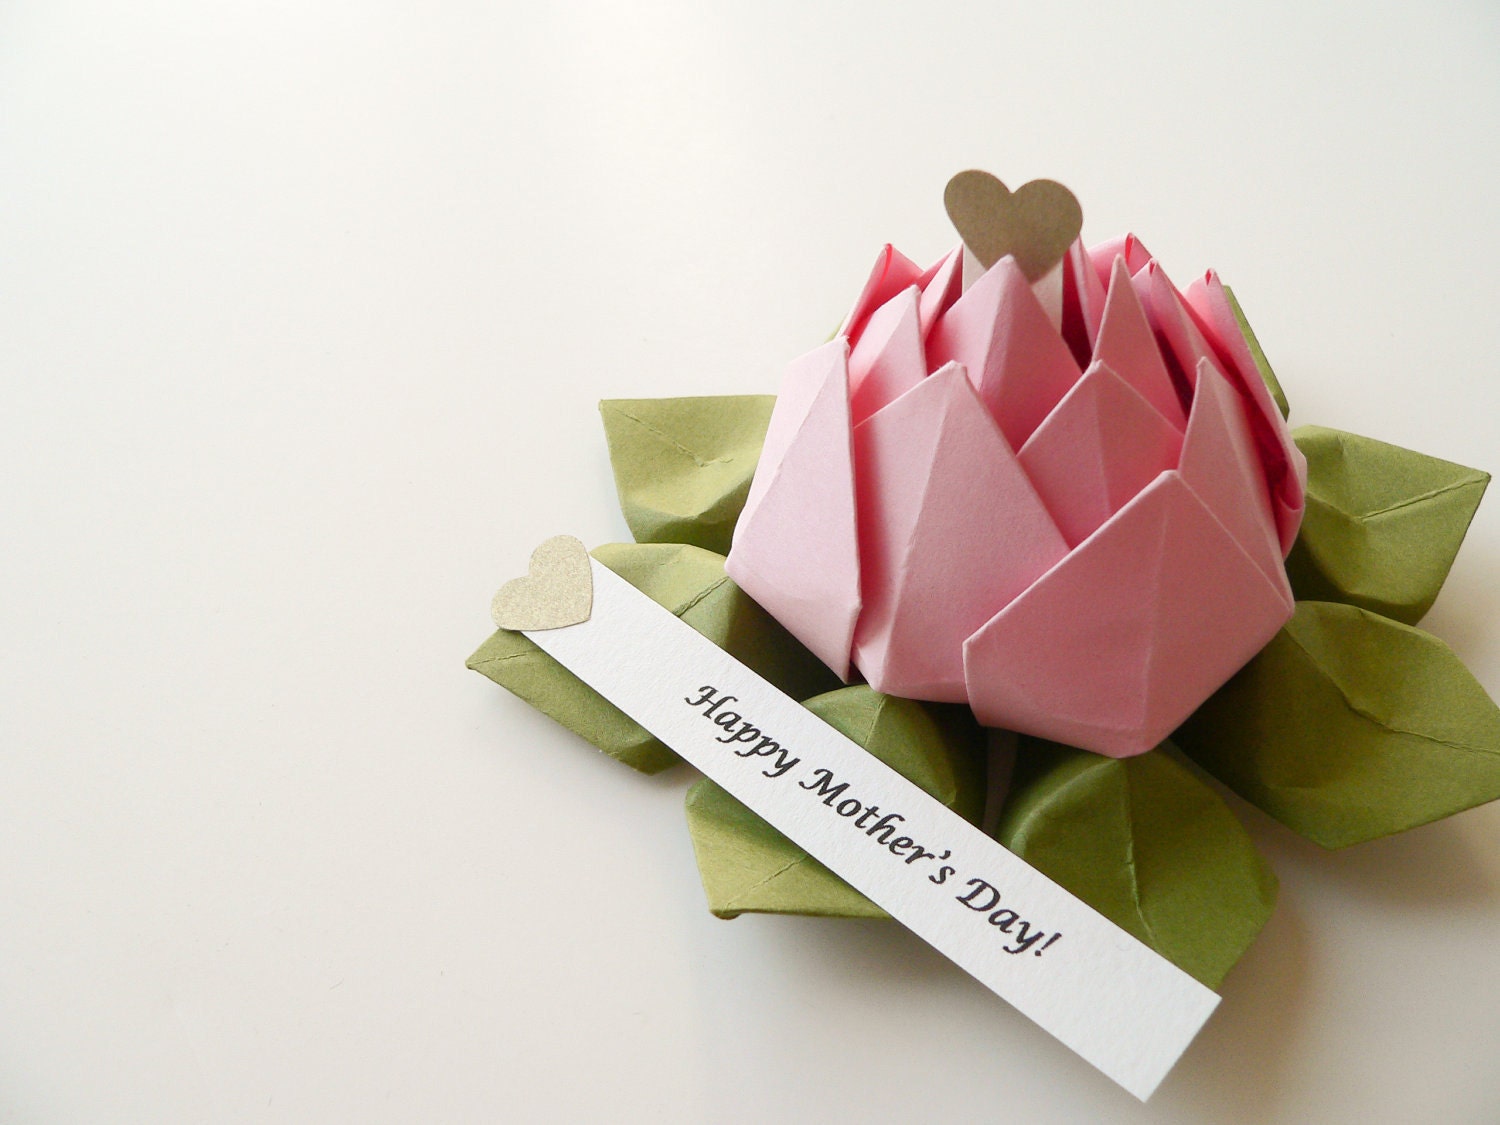 PERSONALIZED Mother's Day Origami Lotus Flower in Blossom Pink and Moss Green with gift box